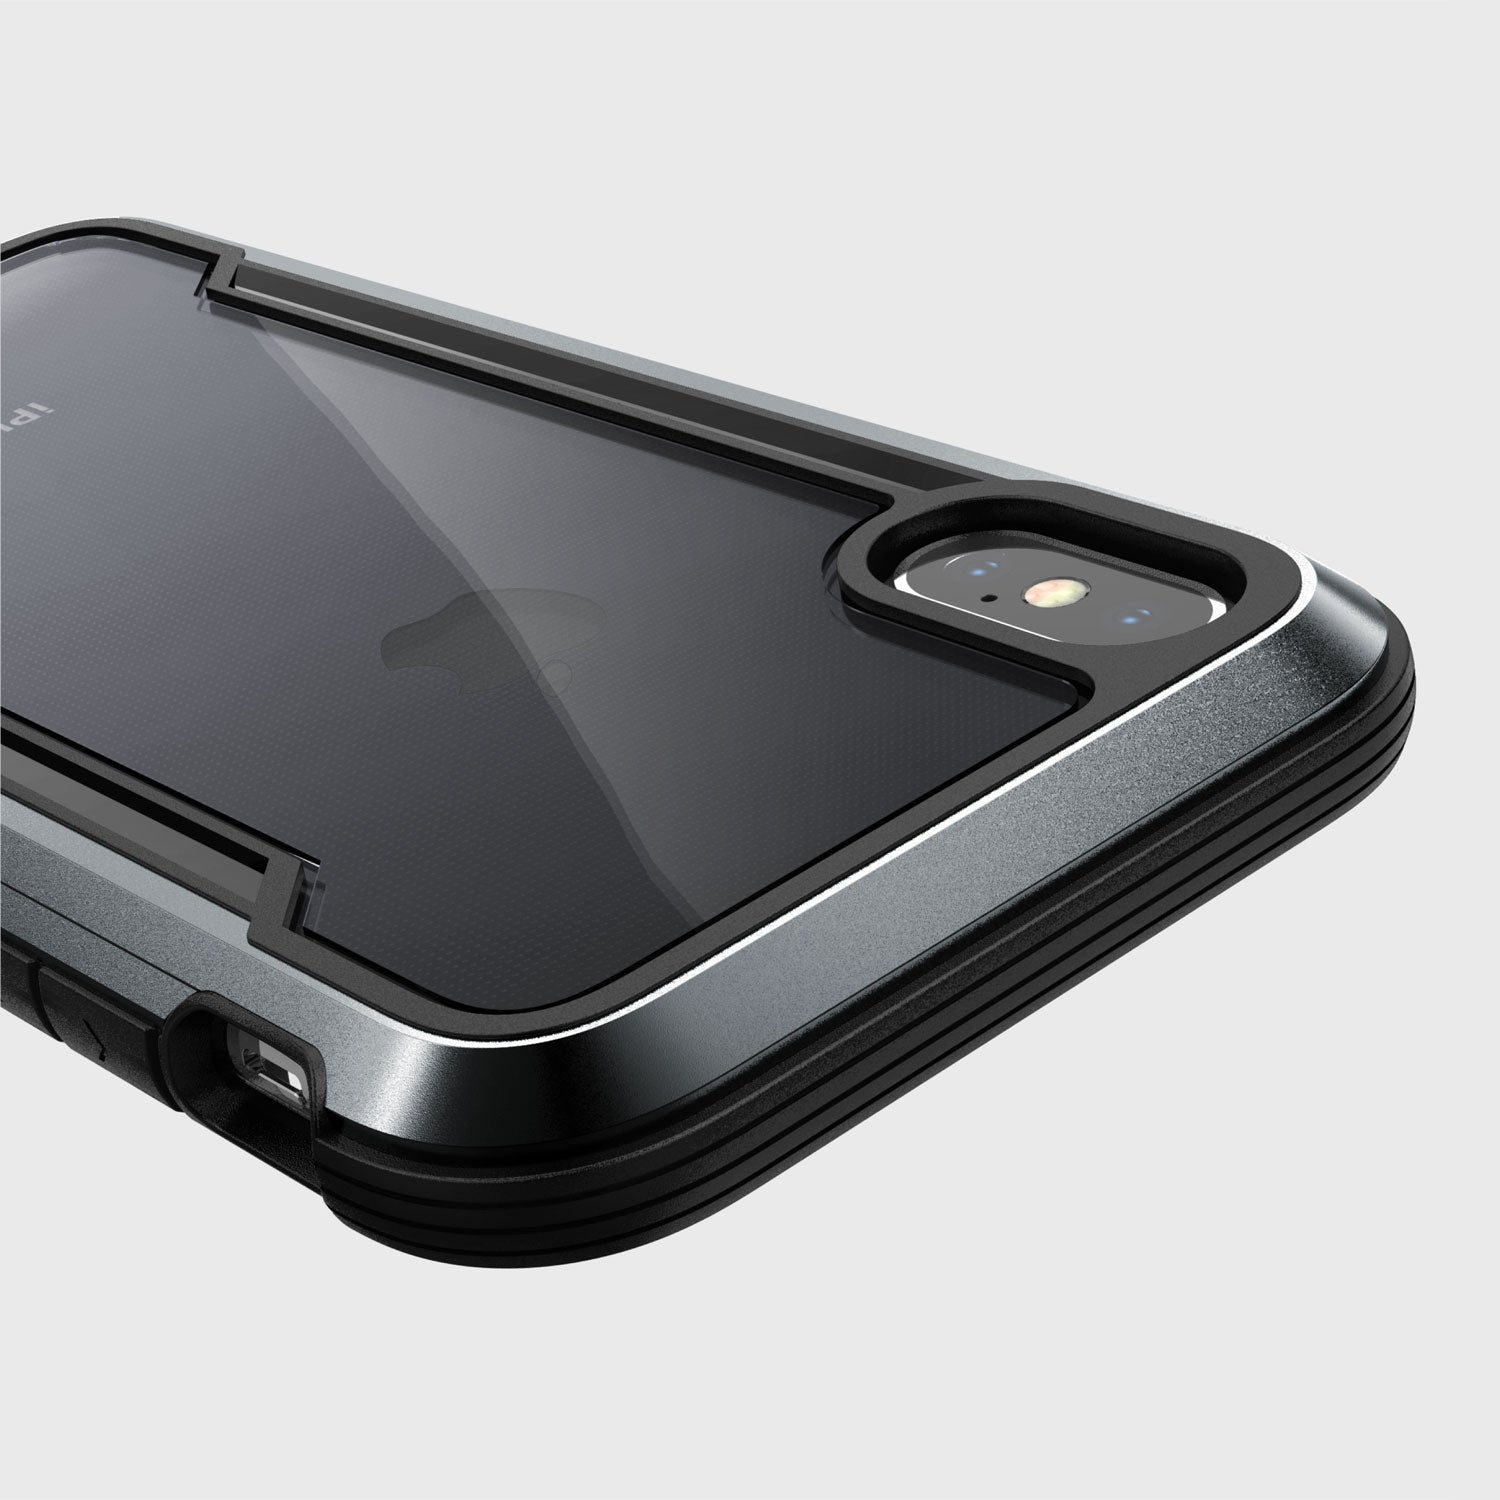 The SHIELD case designed for the iPhone XS Max provides excellent drop protection for your device.